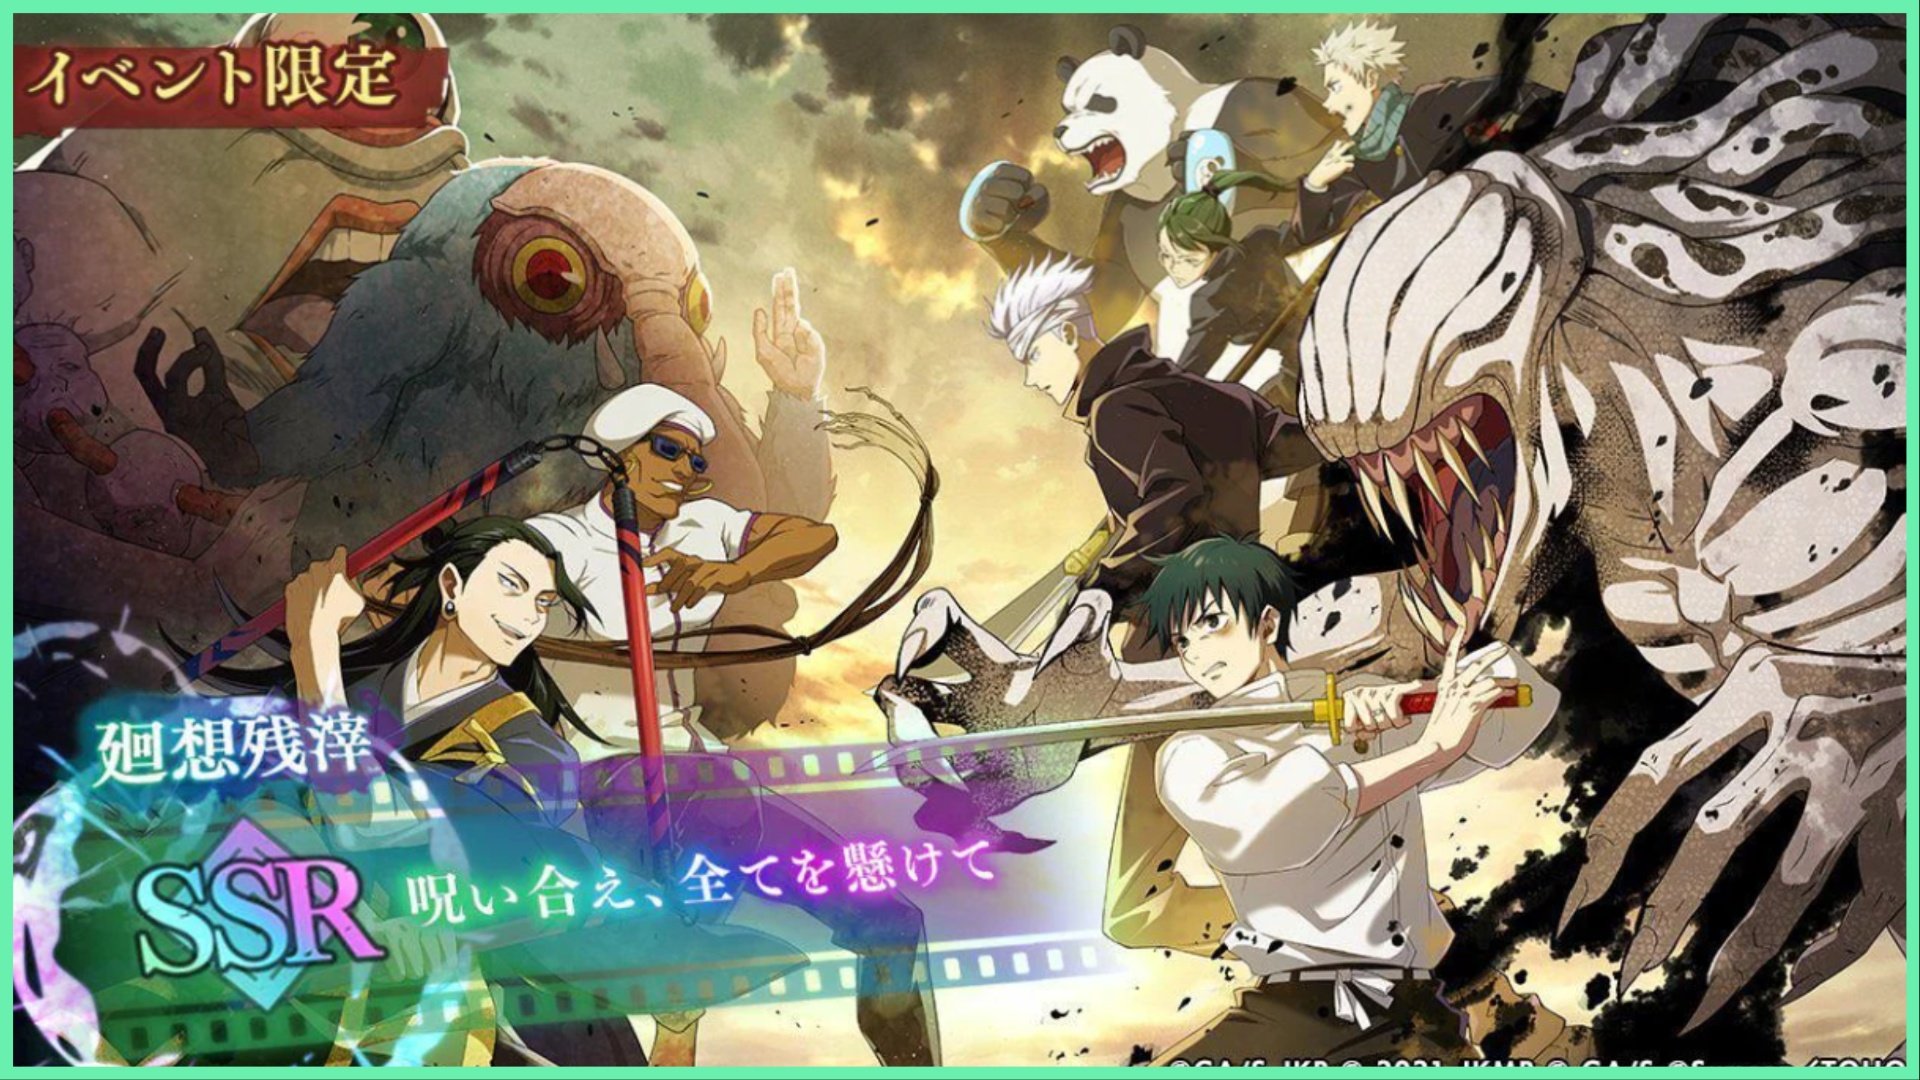 the main illustration for the JJK phantom parade JJK 0 movie event. on the right we see the heroes of this series with main unit, Yuta and Rika at the front of the lead. On the left we see the villains with Geto at their lead.